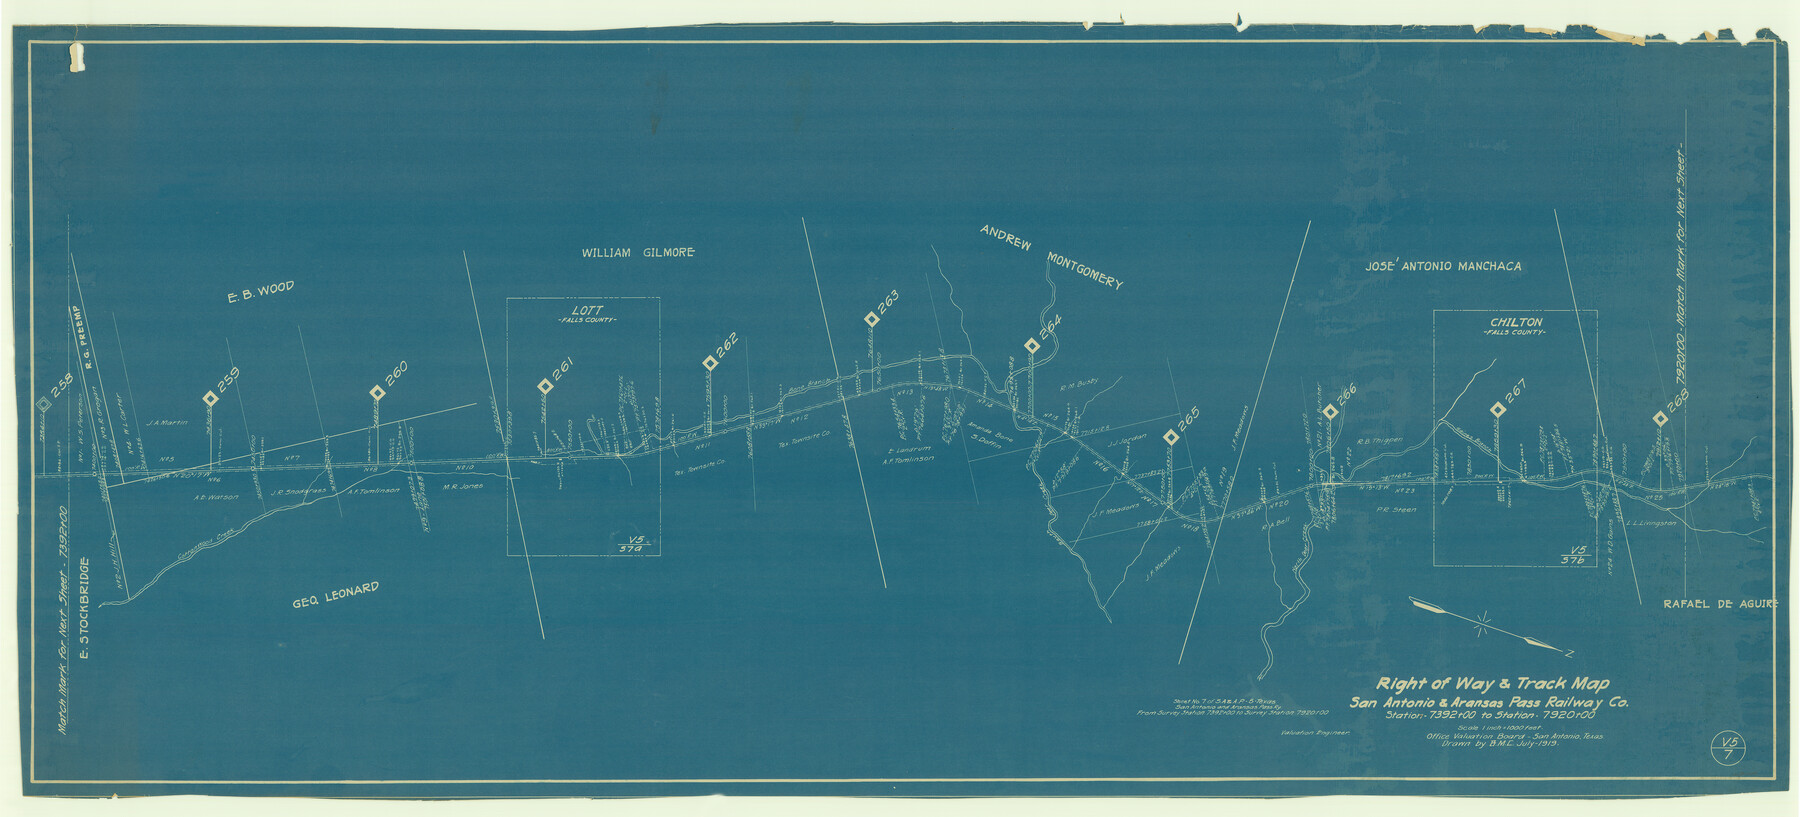 64039, Right of Way & Track Map San Antonio & Aransas Pass Railway Co., General Map Collection